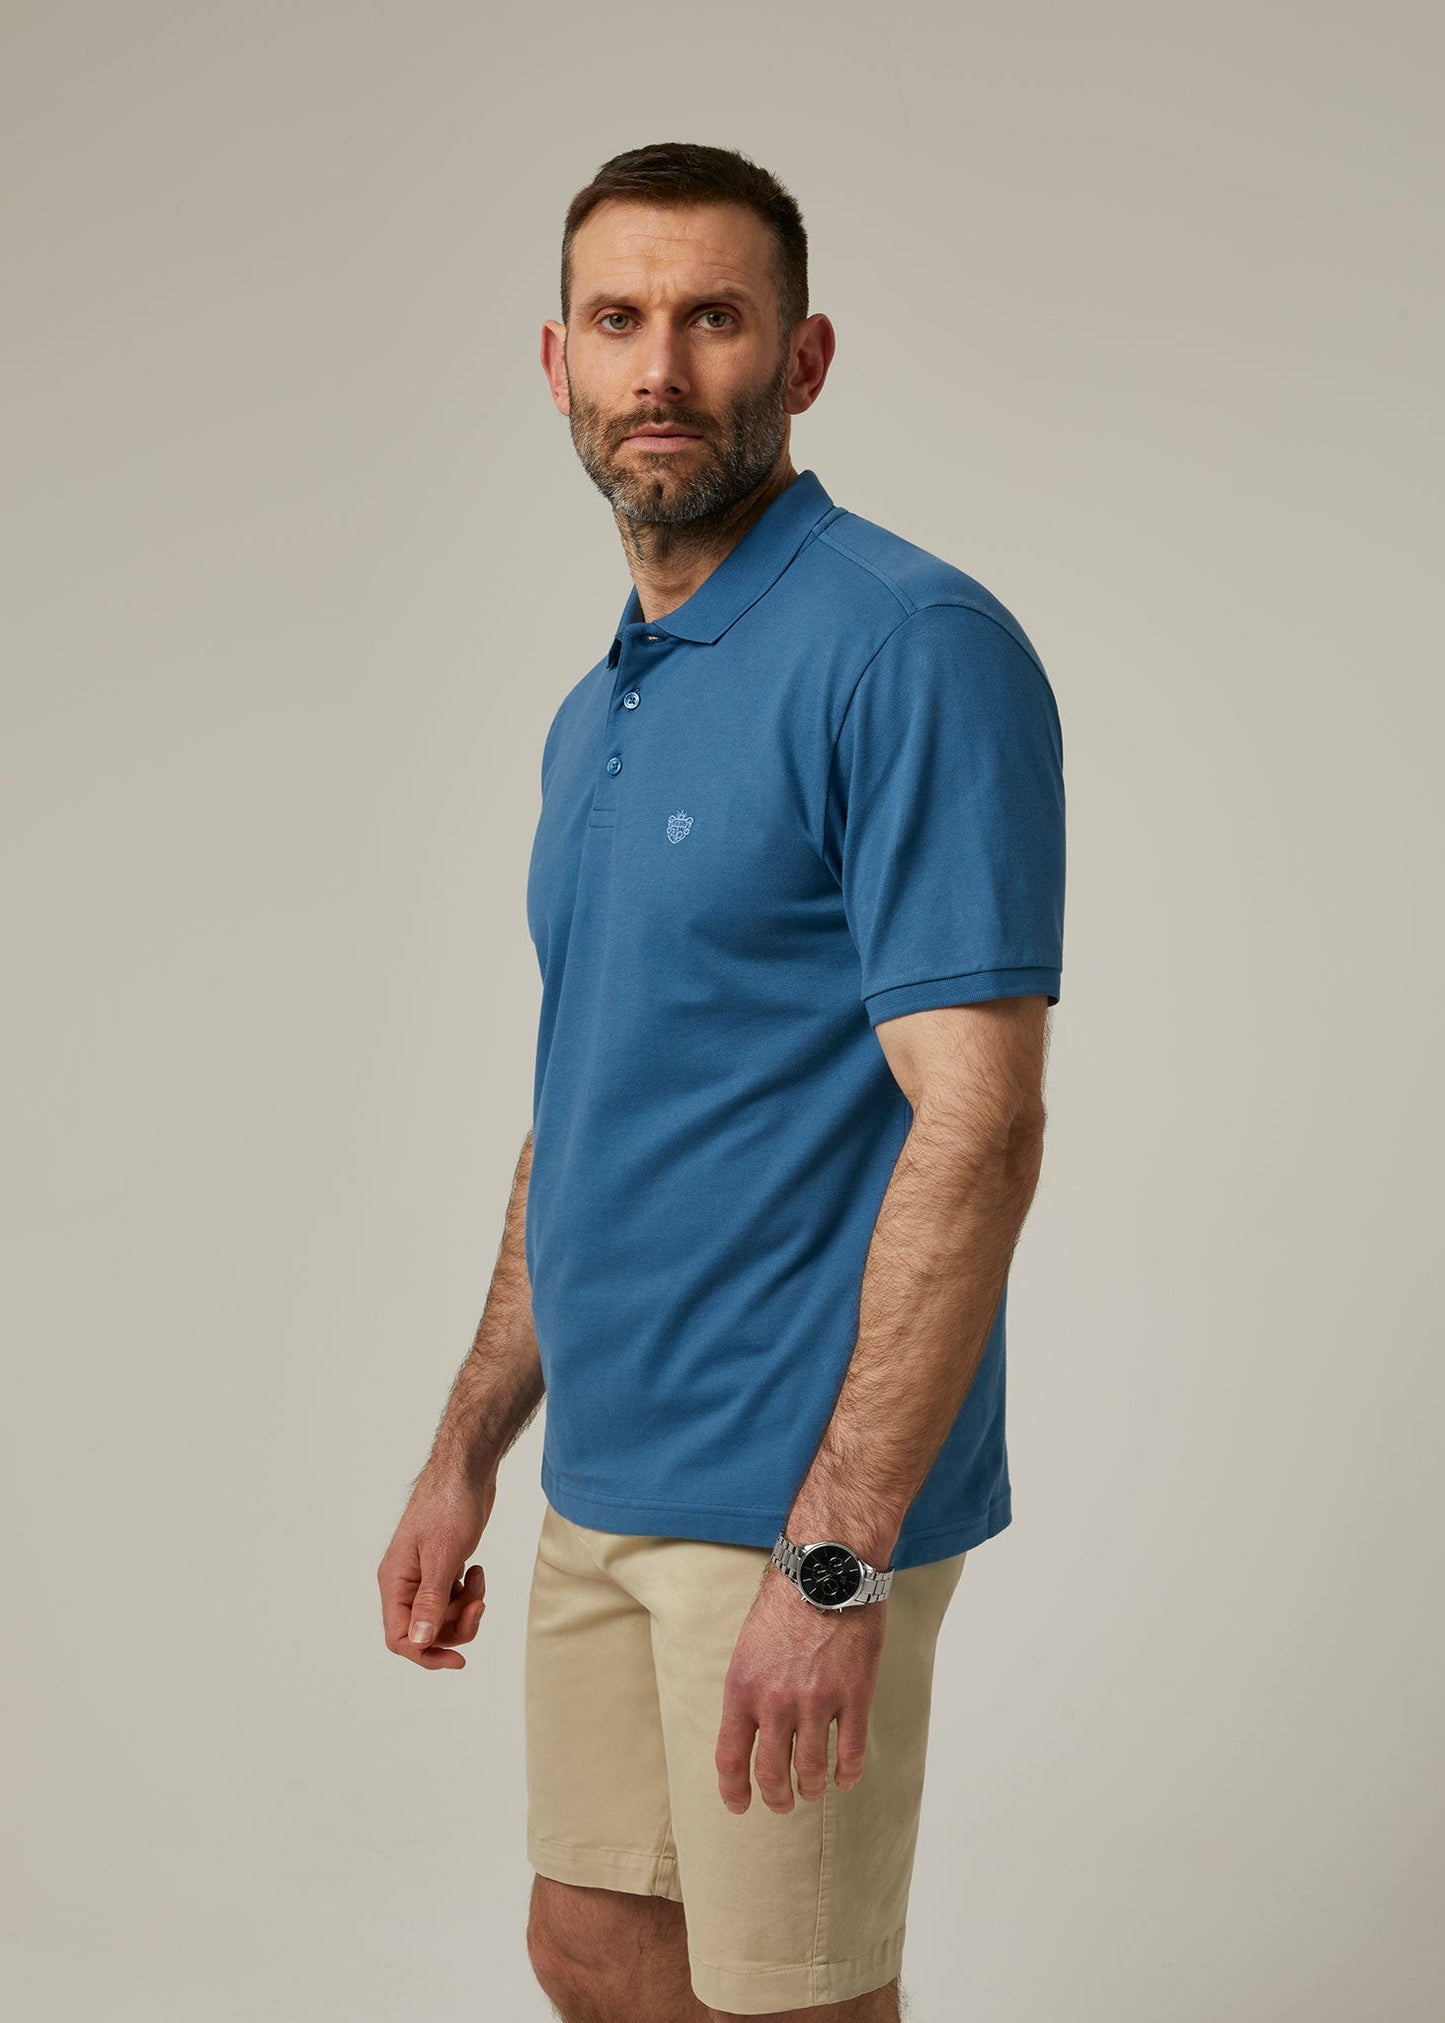 Alan Paine men's short sleeved polo shirt in mid-blue